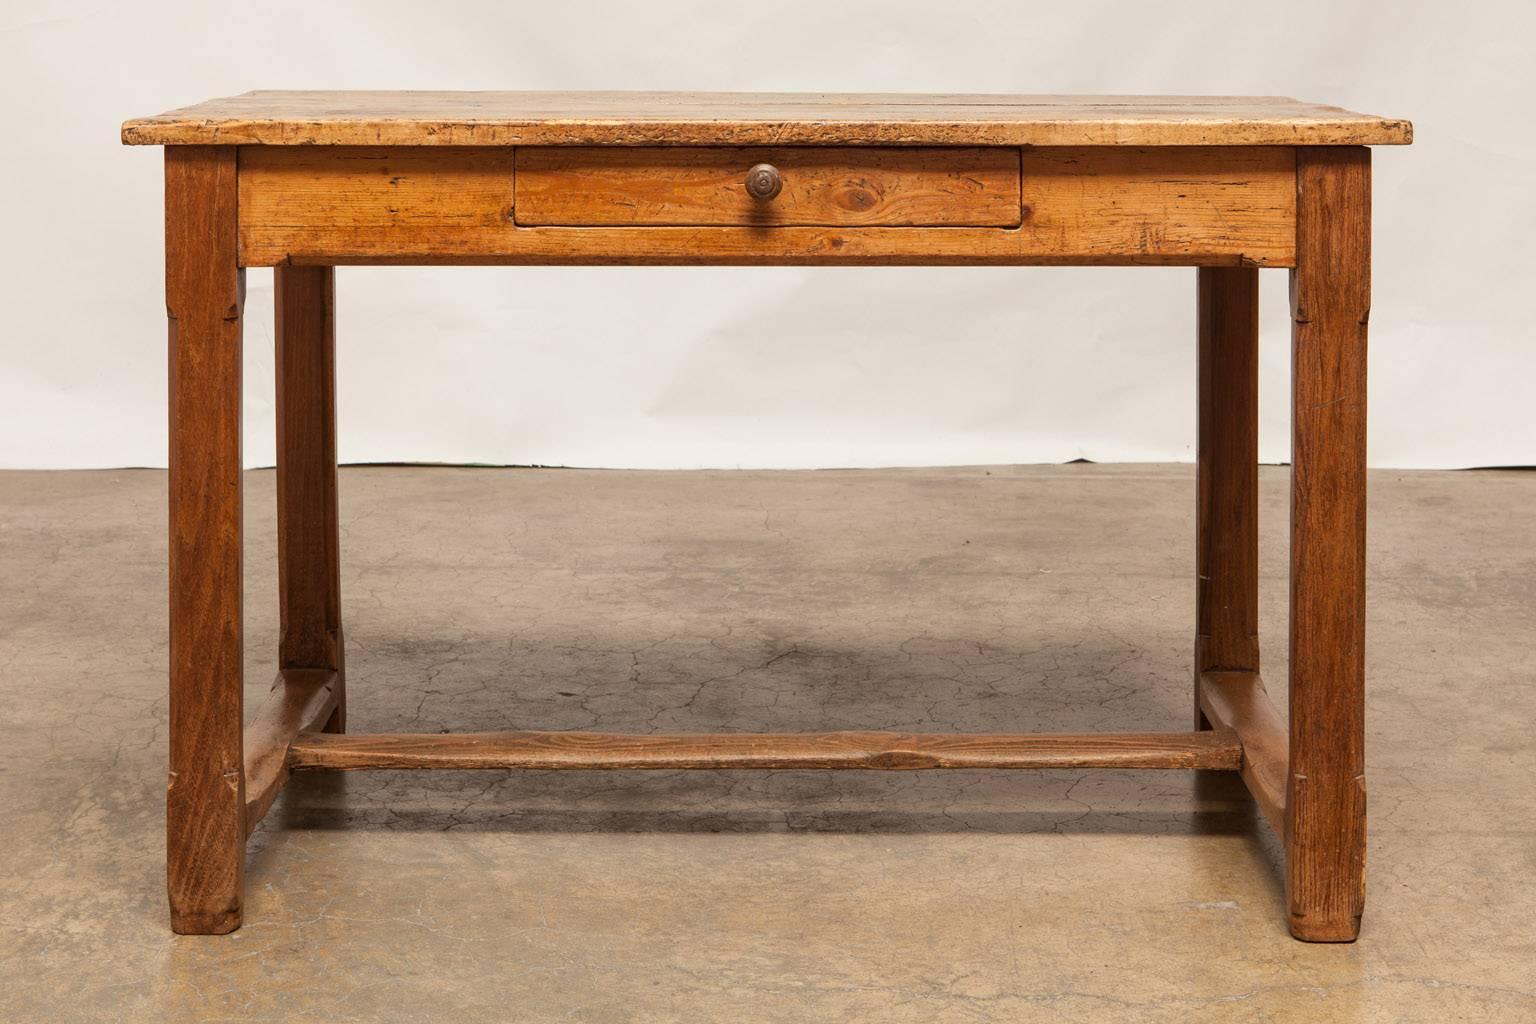 19th Century French Farmhouse Kitchen Table with Leaves In Distressed Condition In Rio Vista, CA